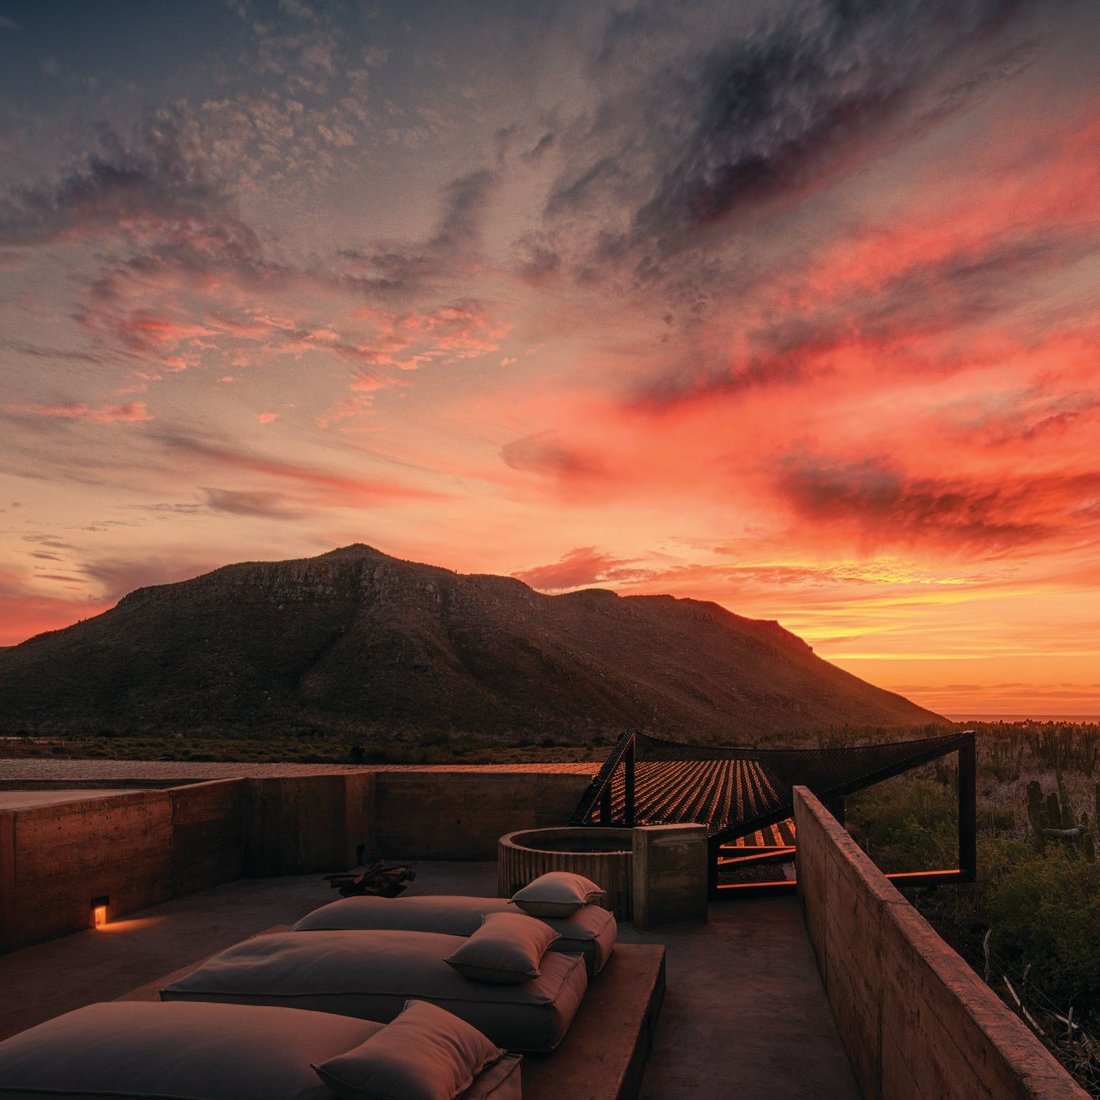 Book one of Paradero Todos Santos’ rooftop suites for uninterrupted views of the region’s stunning sunsets. PHOTO COURTESY OF PARADERO TODOS SANTOS